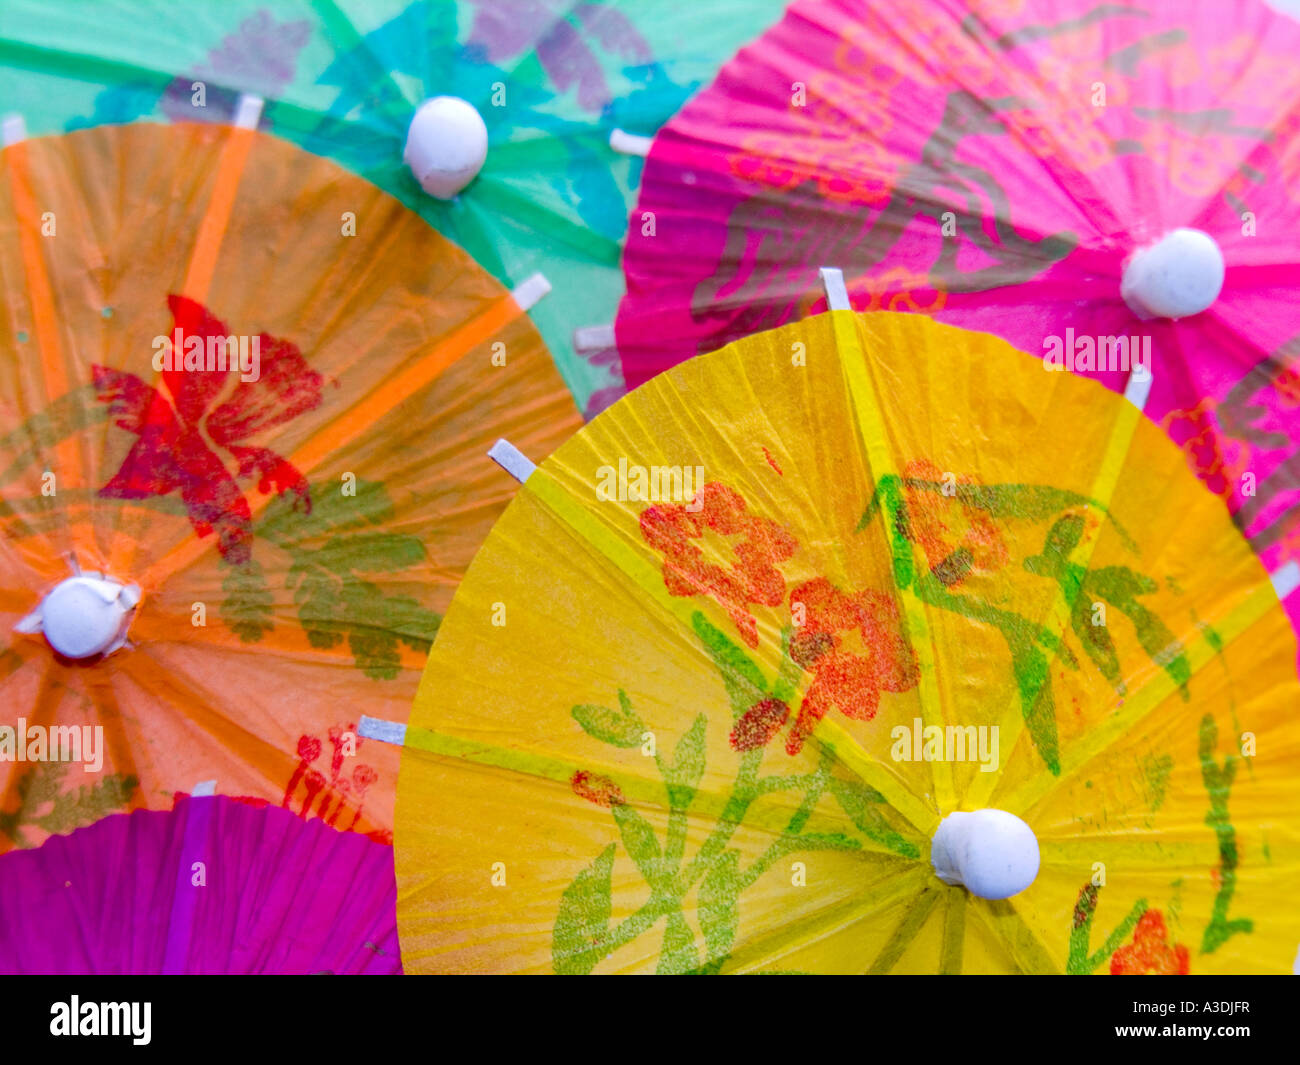 A closeup shot of some colourful cocktail umbrellas used in drinks Stock Photo